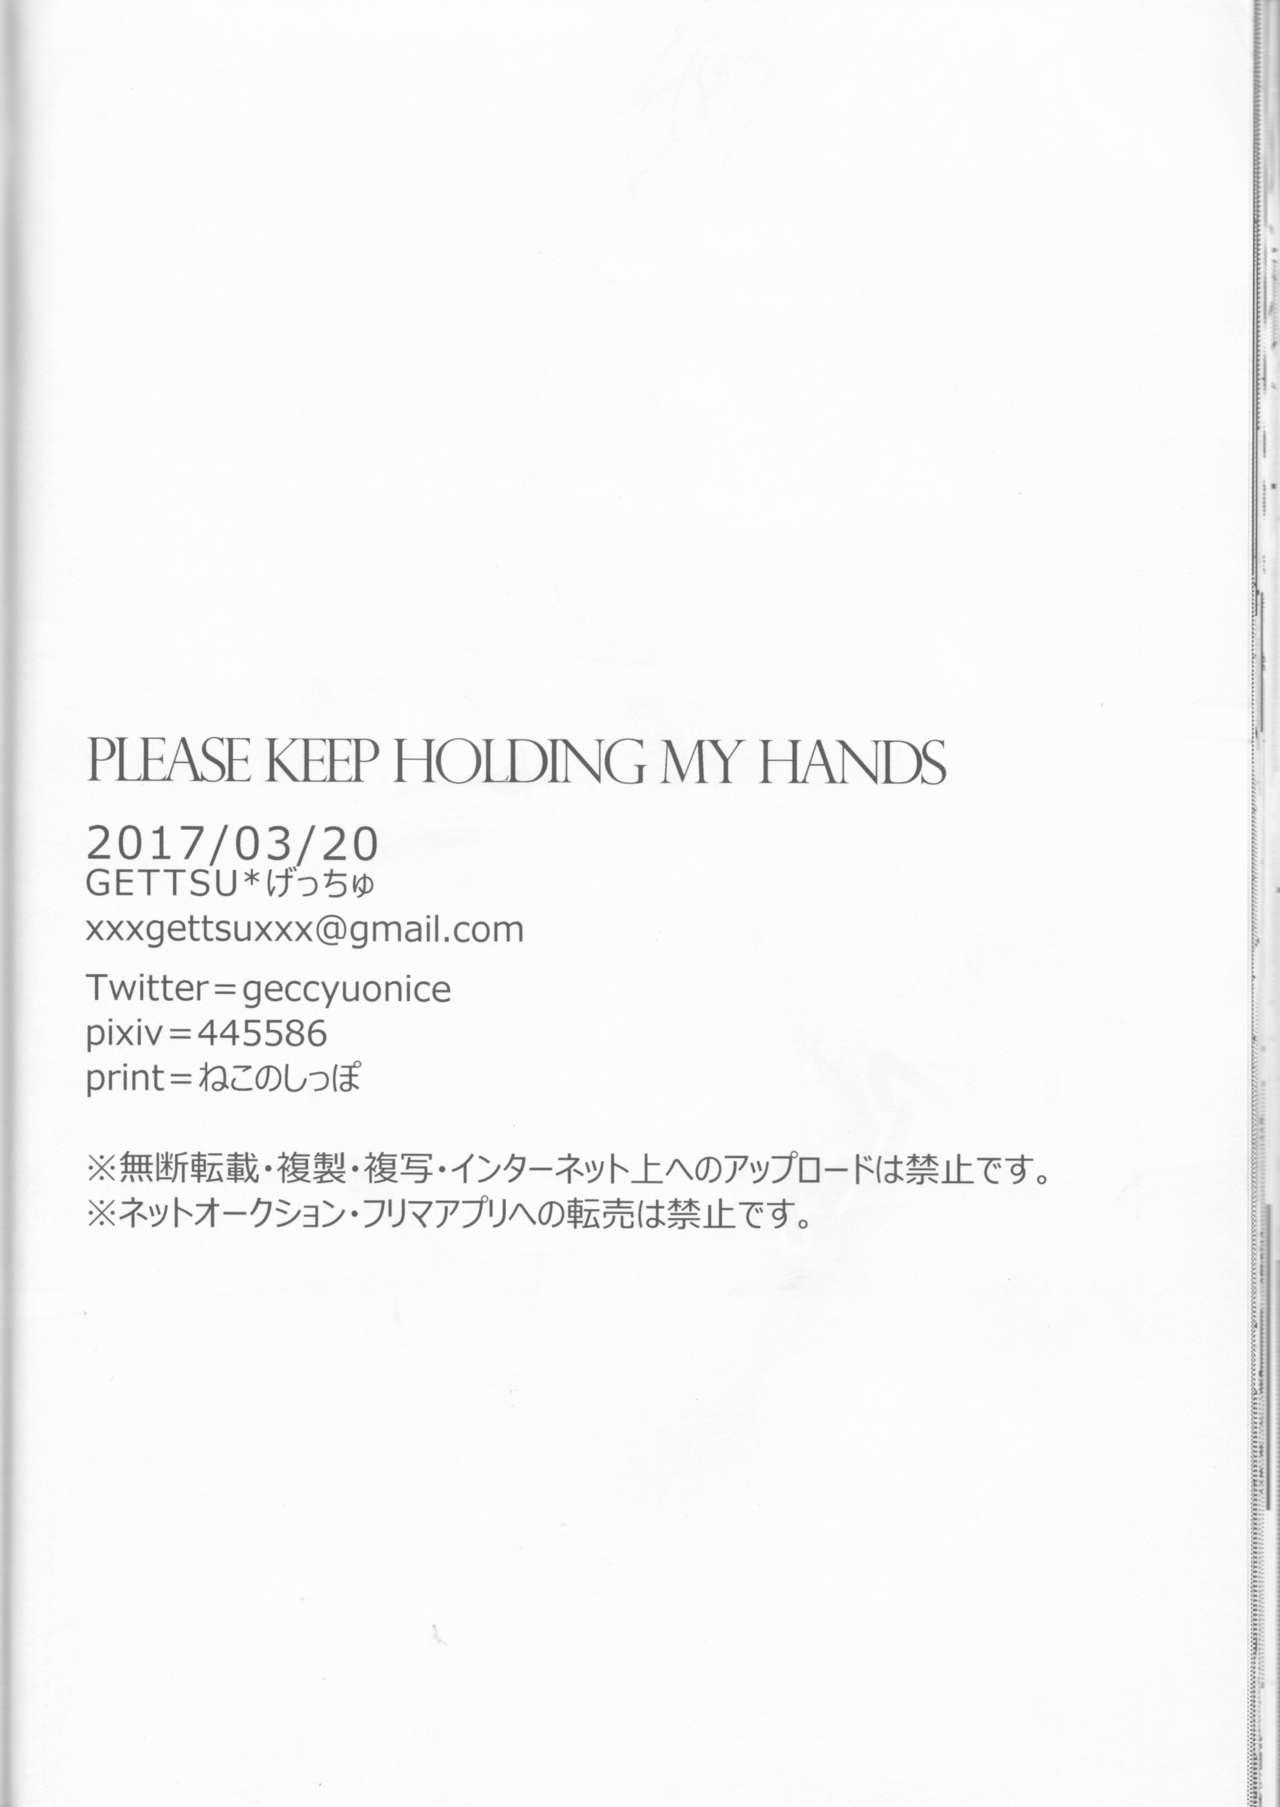 Please keep holding my hands 28